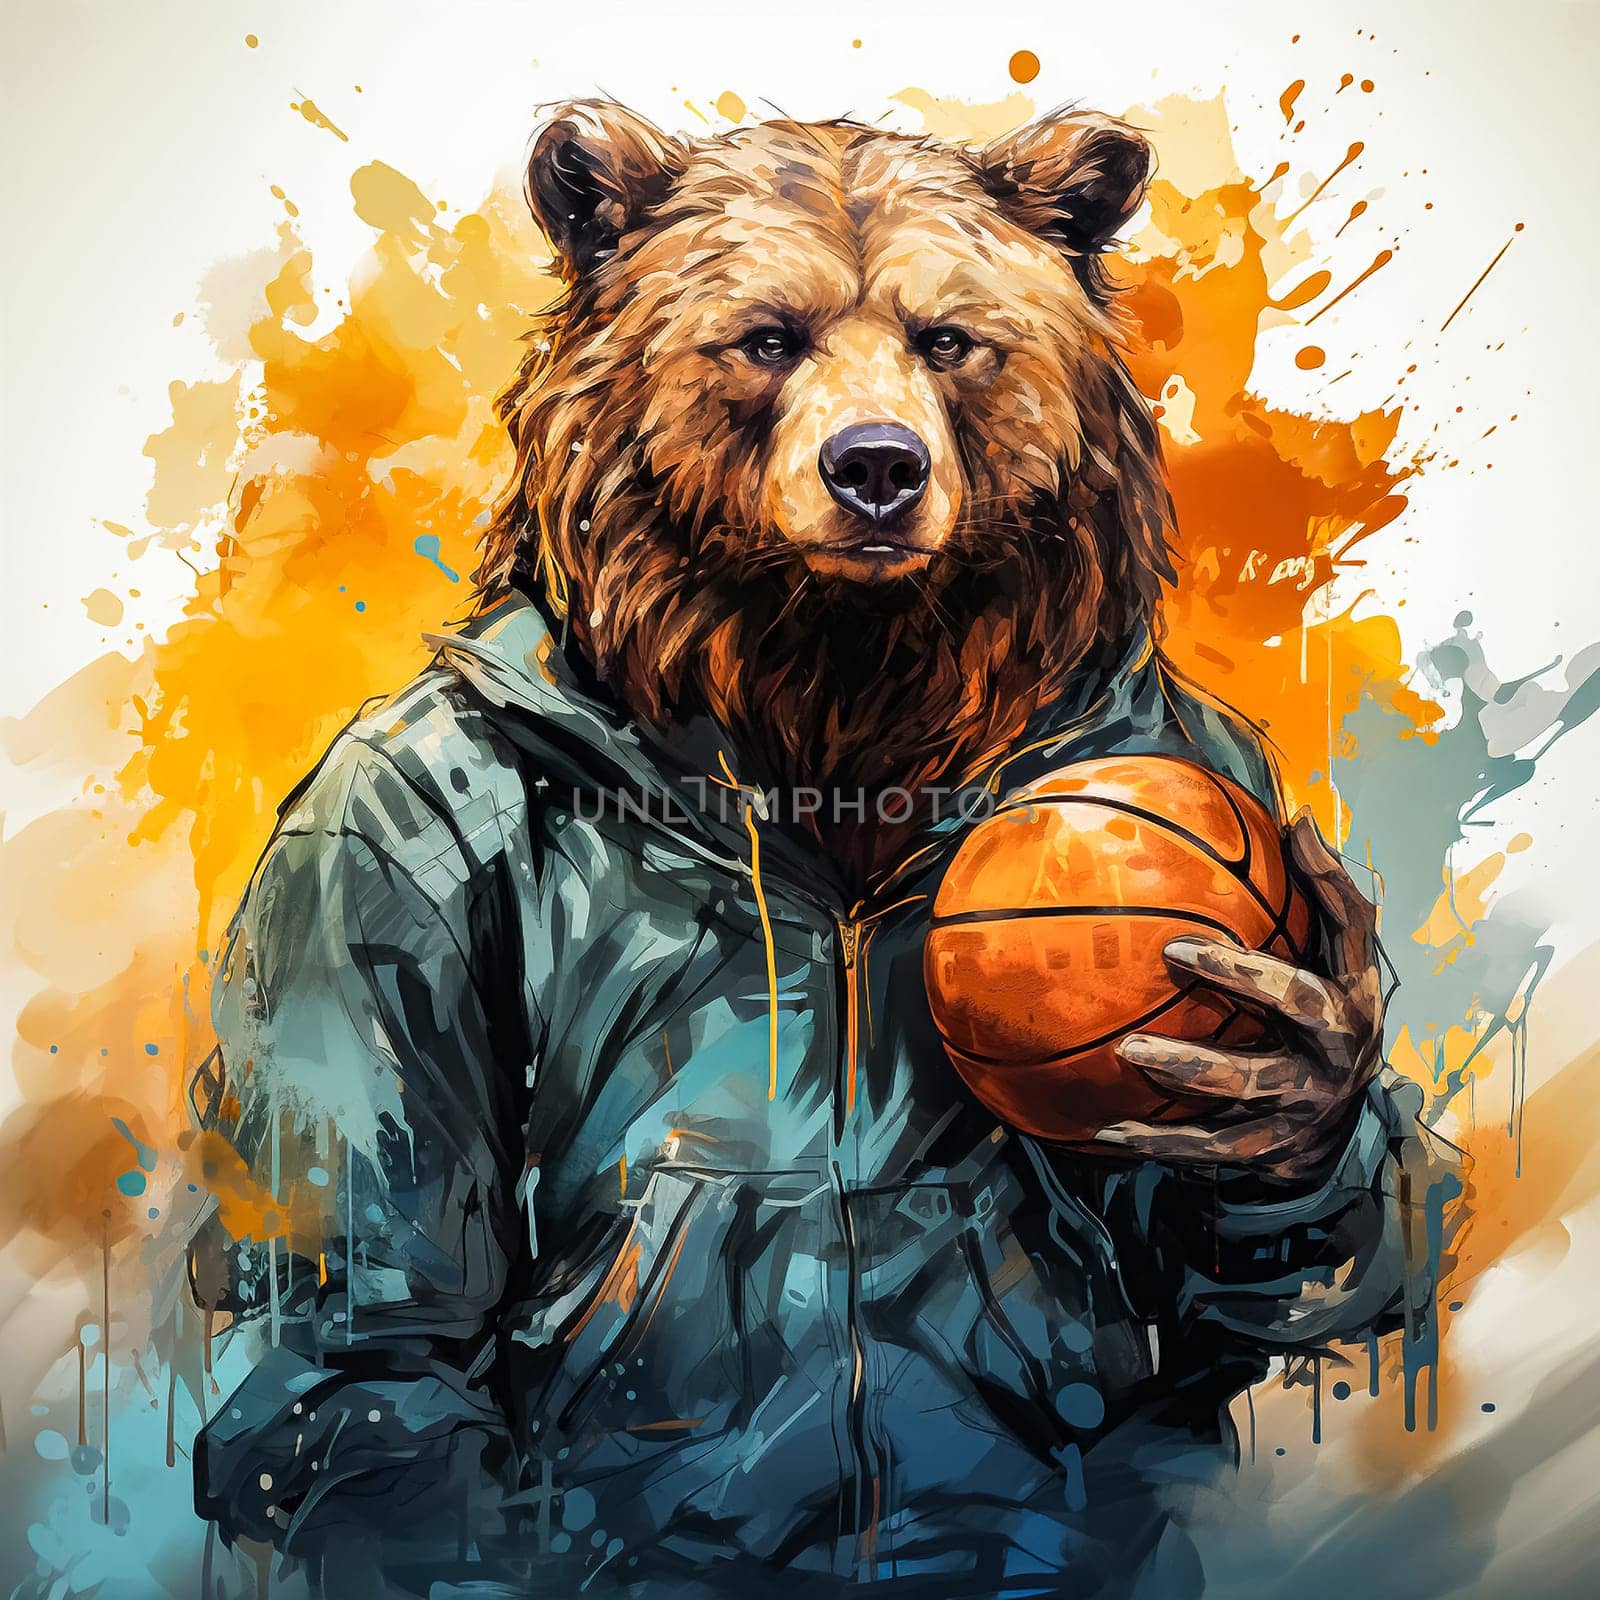 a bear exhibits athleticism by skillfully playing basketball by Alla_Morozova93